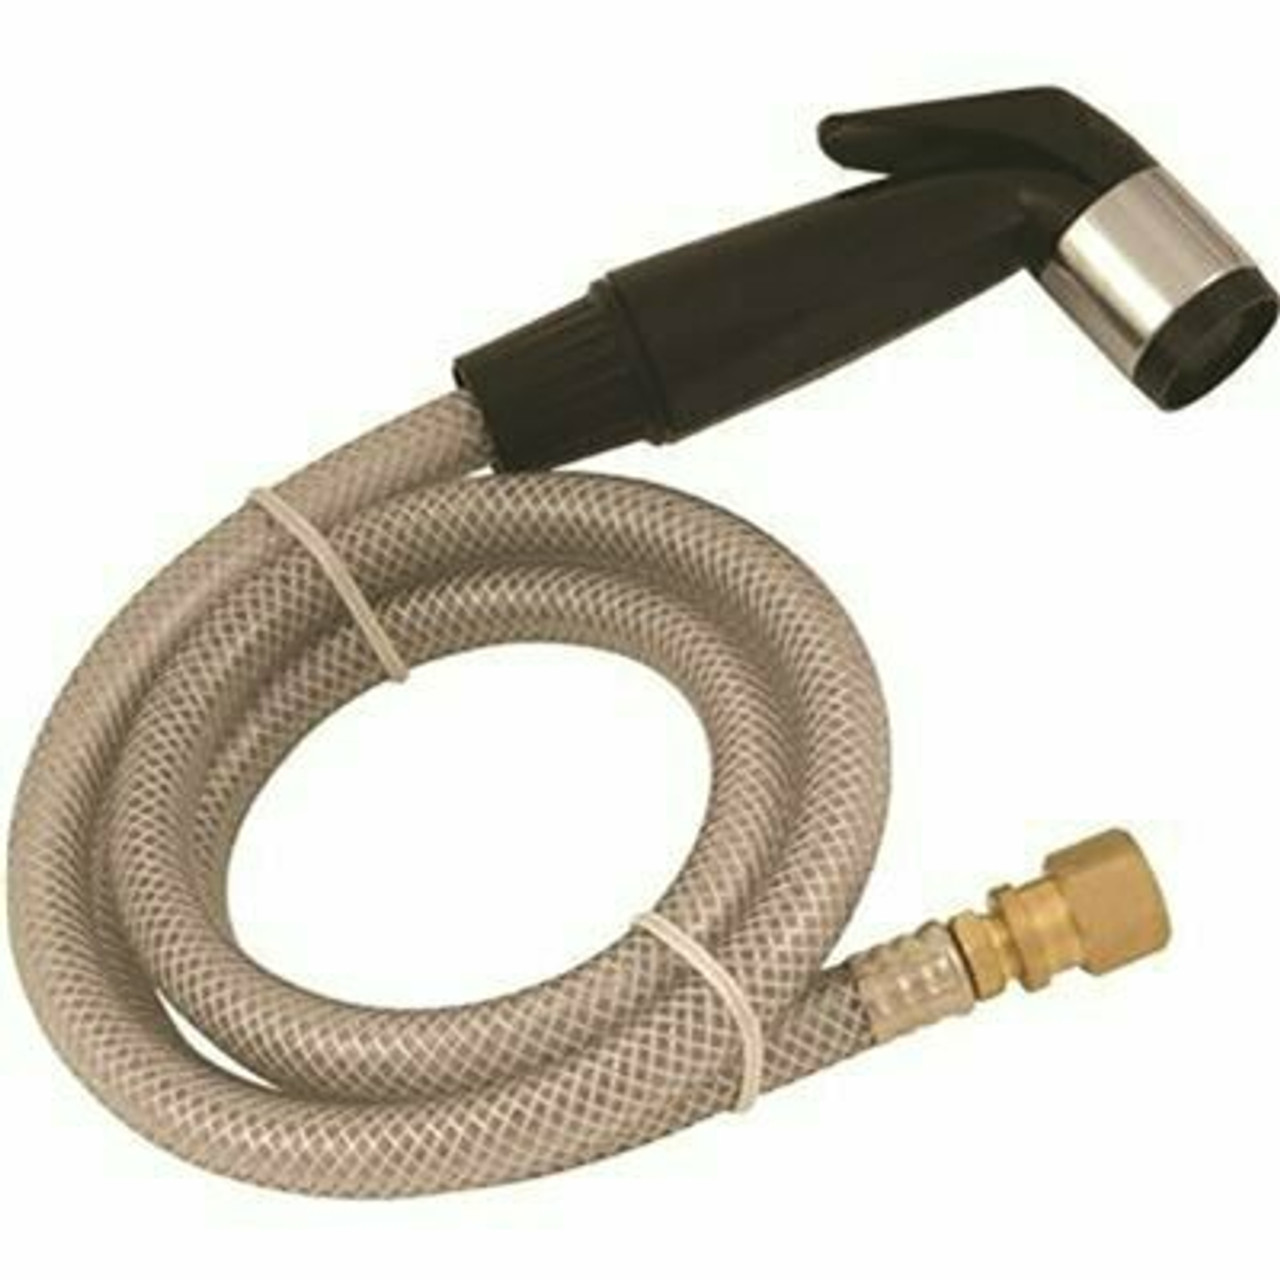 Proplus Universal 48 In. Spray Head And Hose, Black